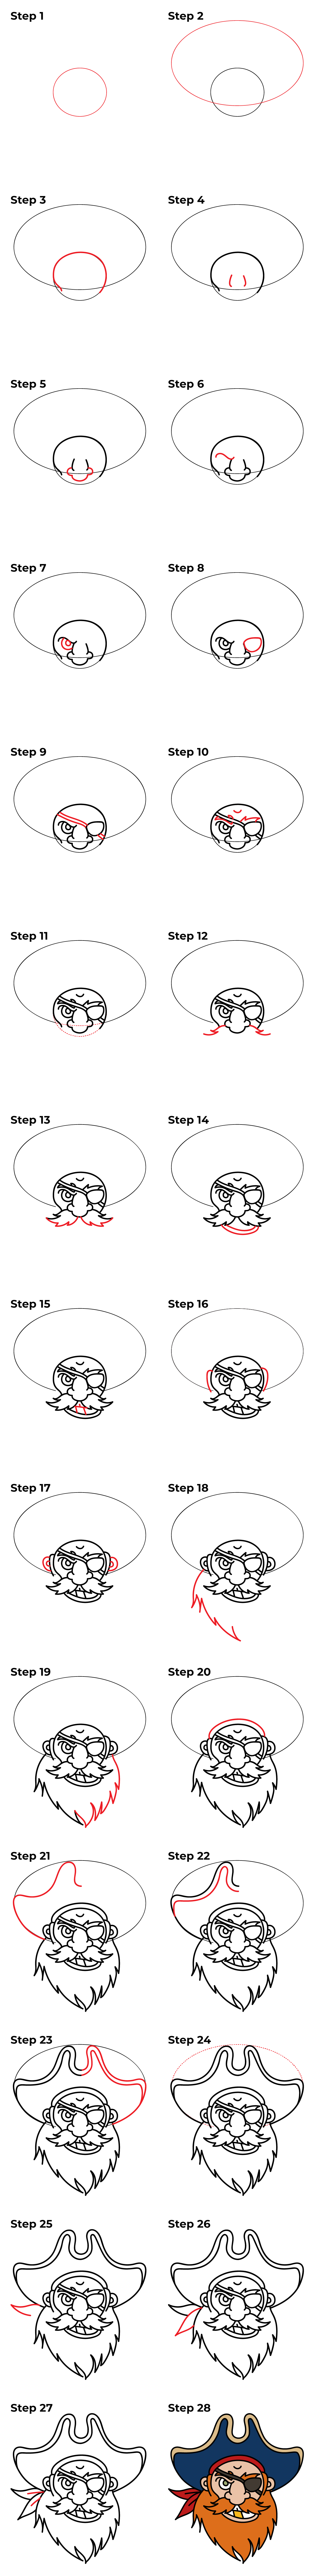 How to Draw a Pirate Face - Printable Tutorial